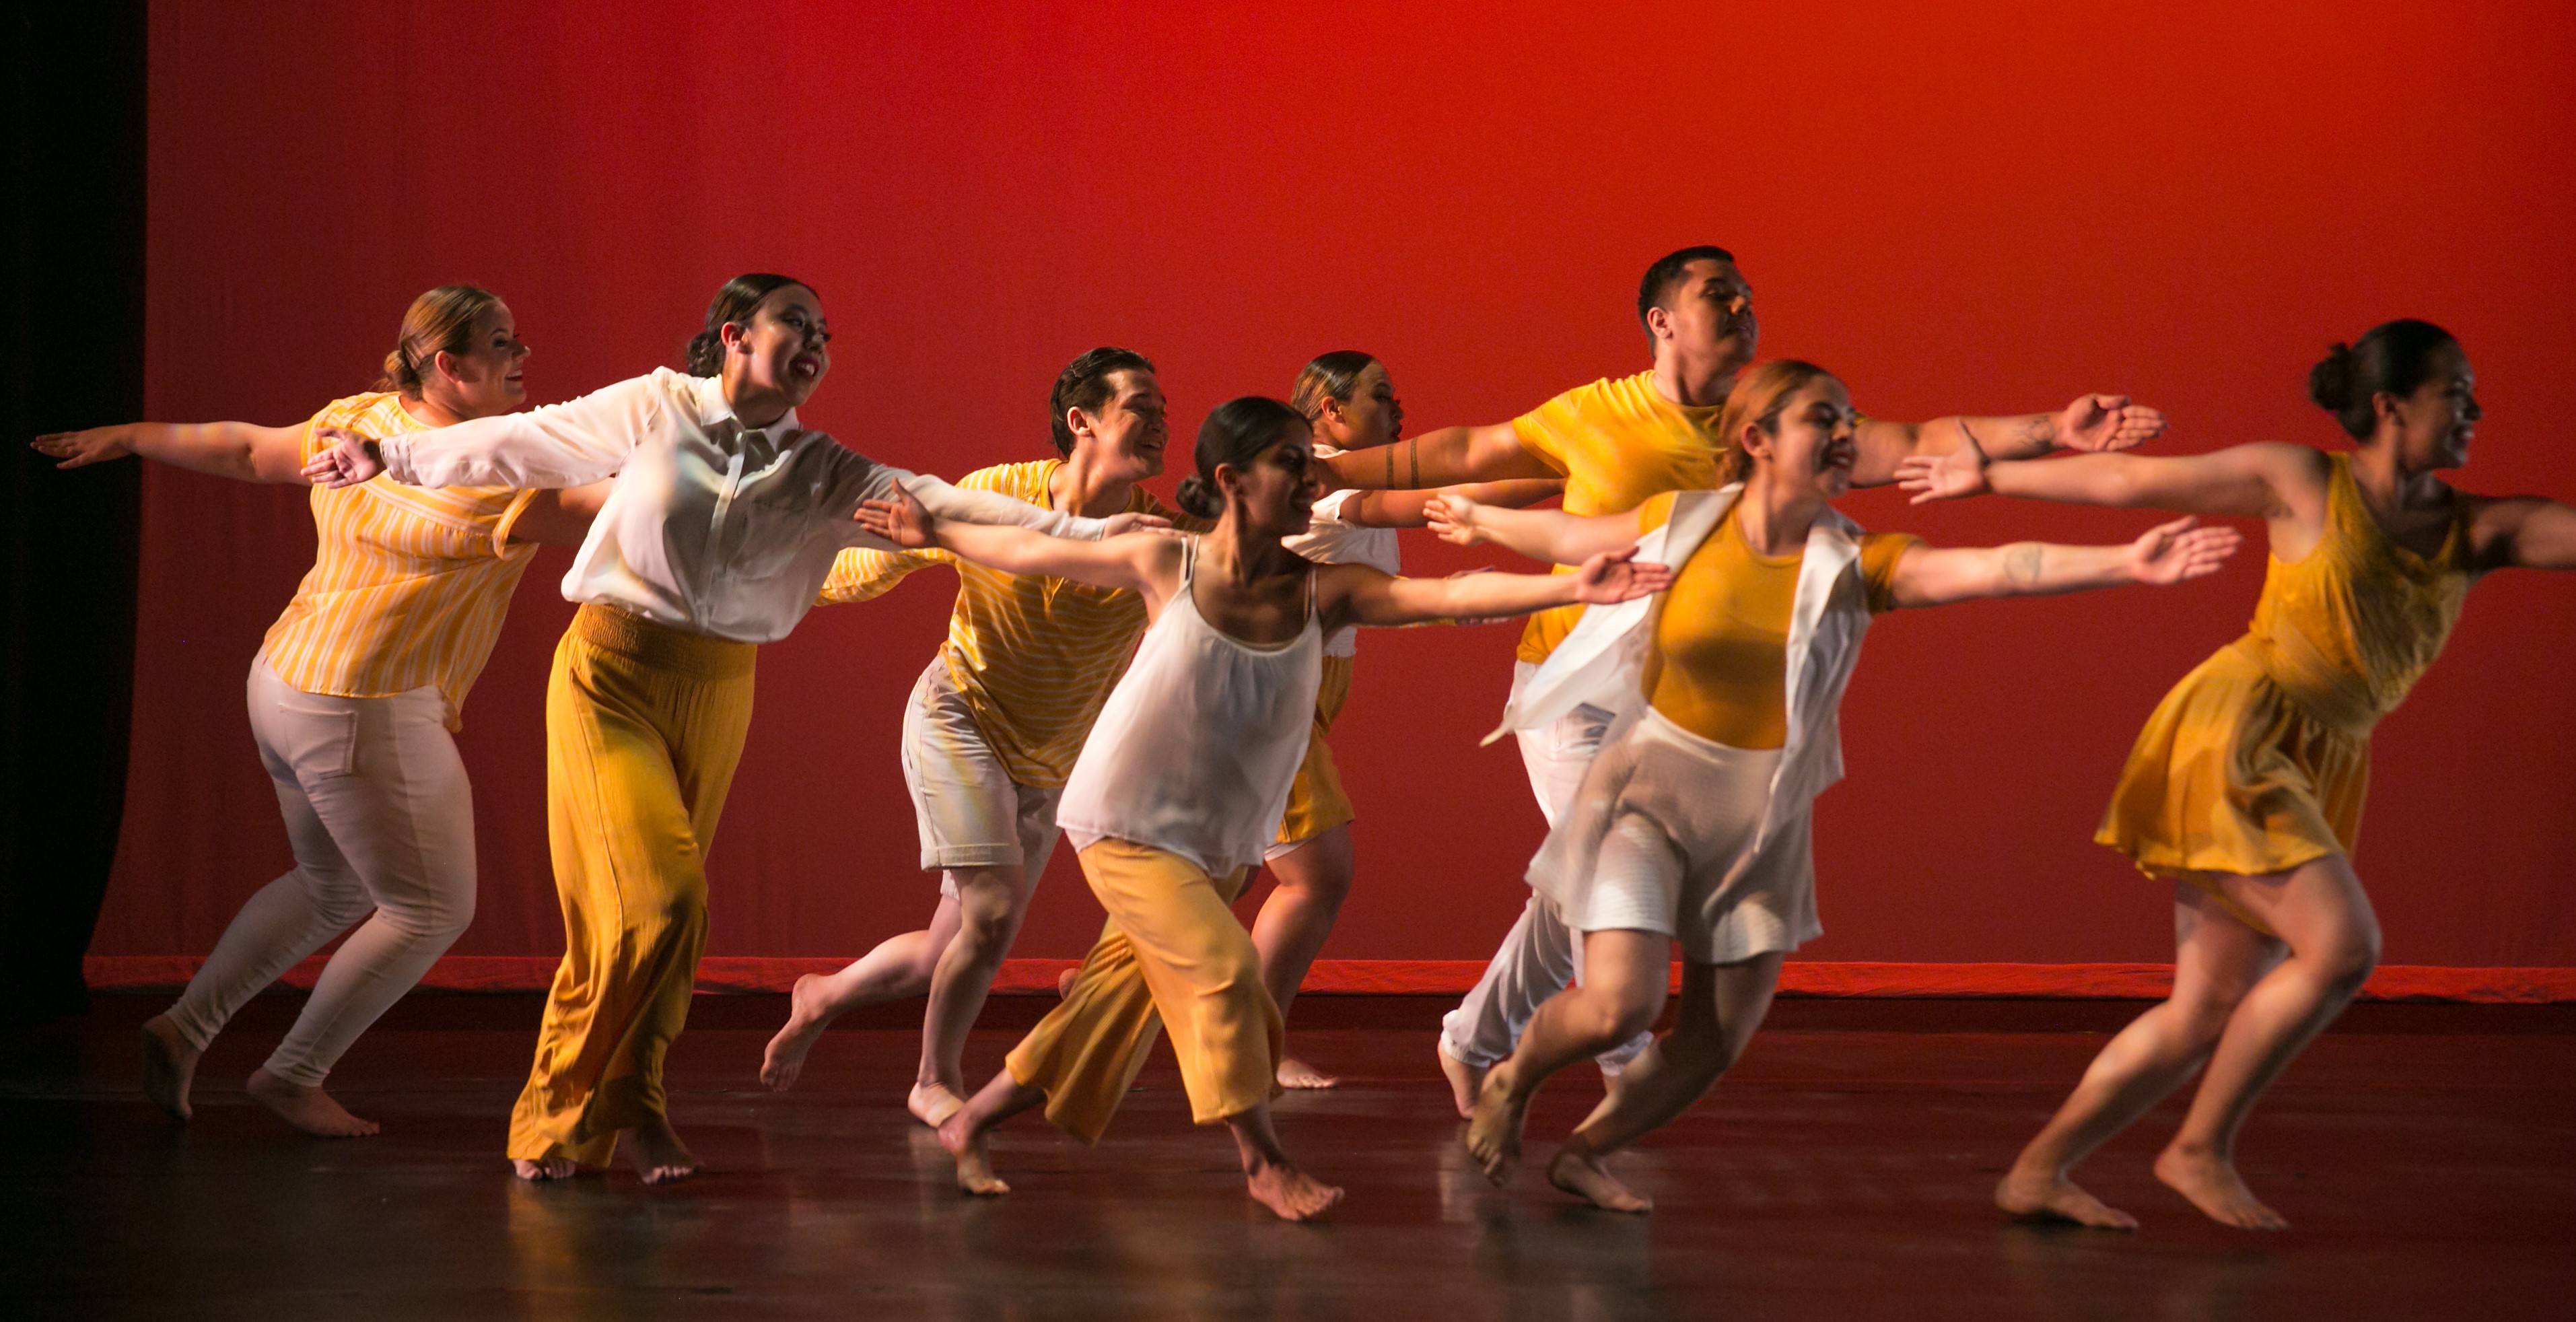 Hive dancers performing a reach movement